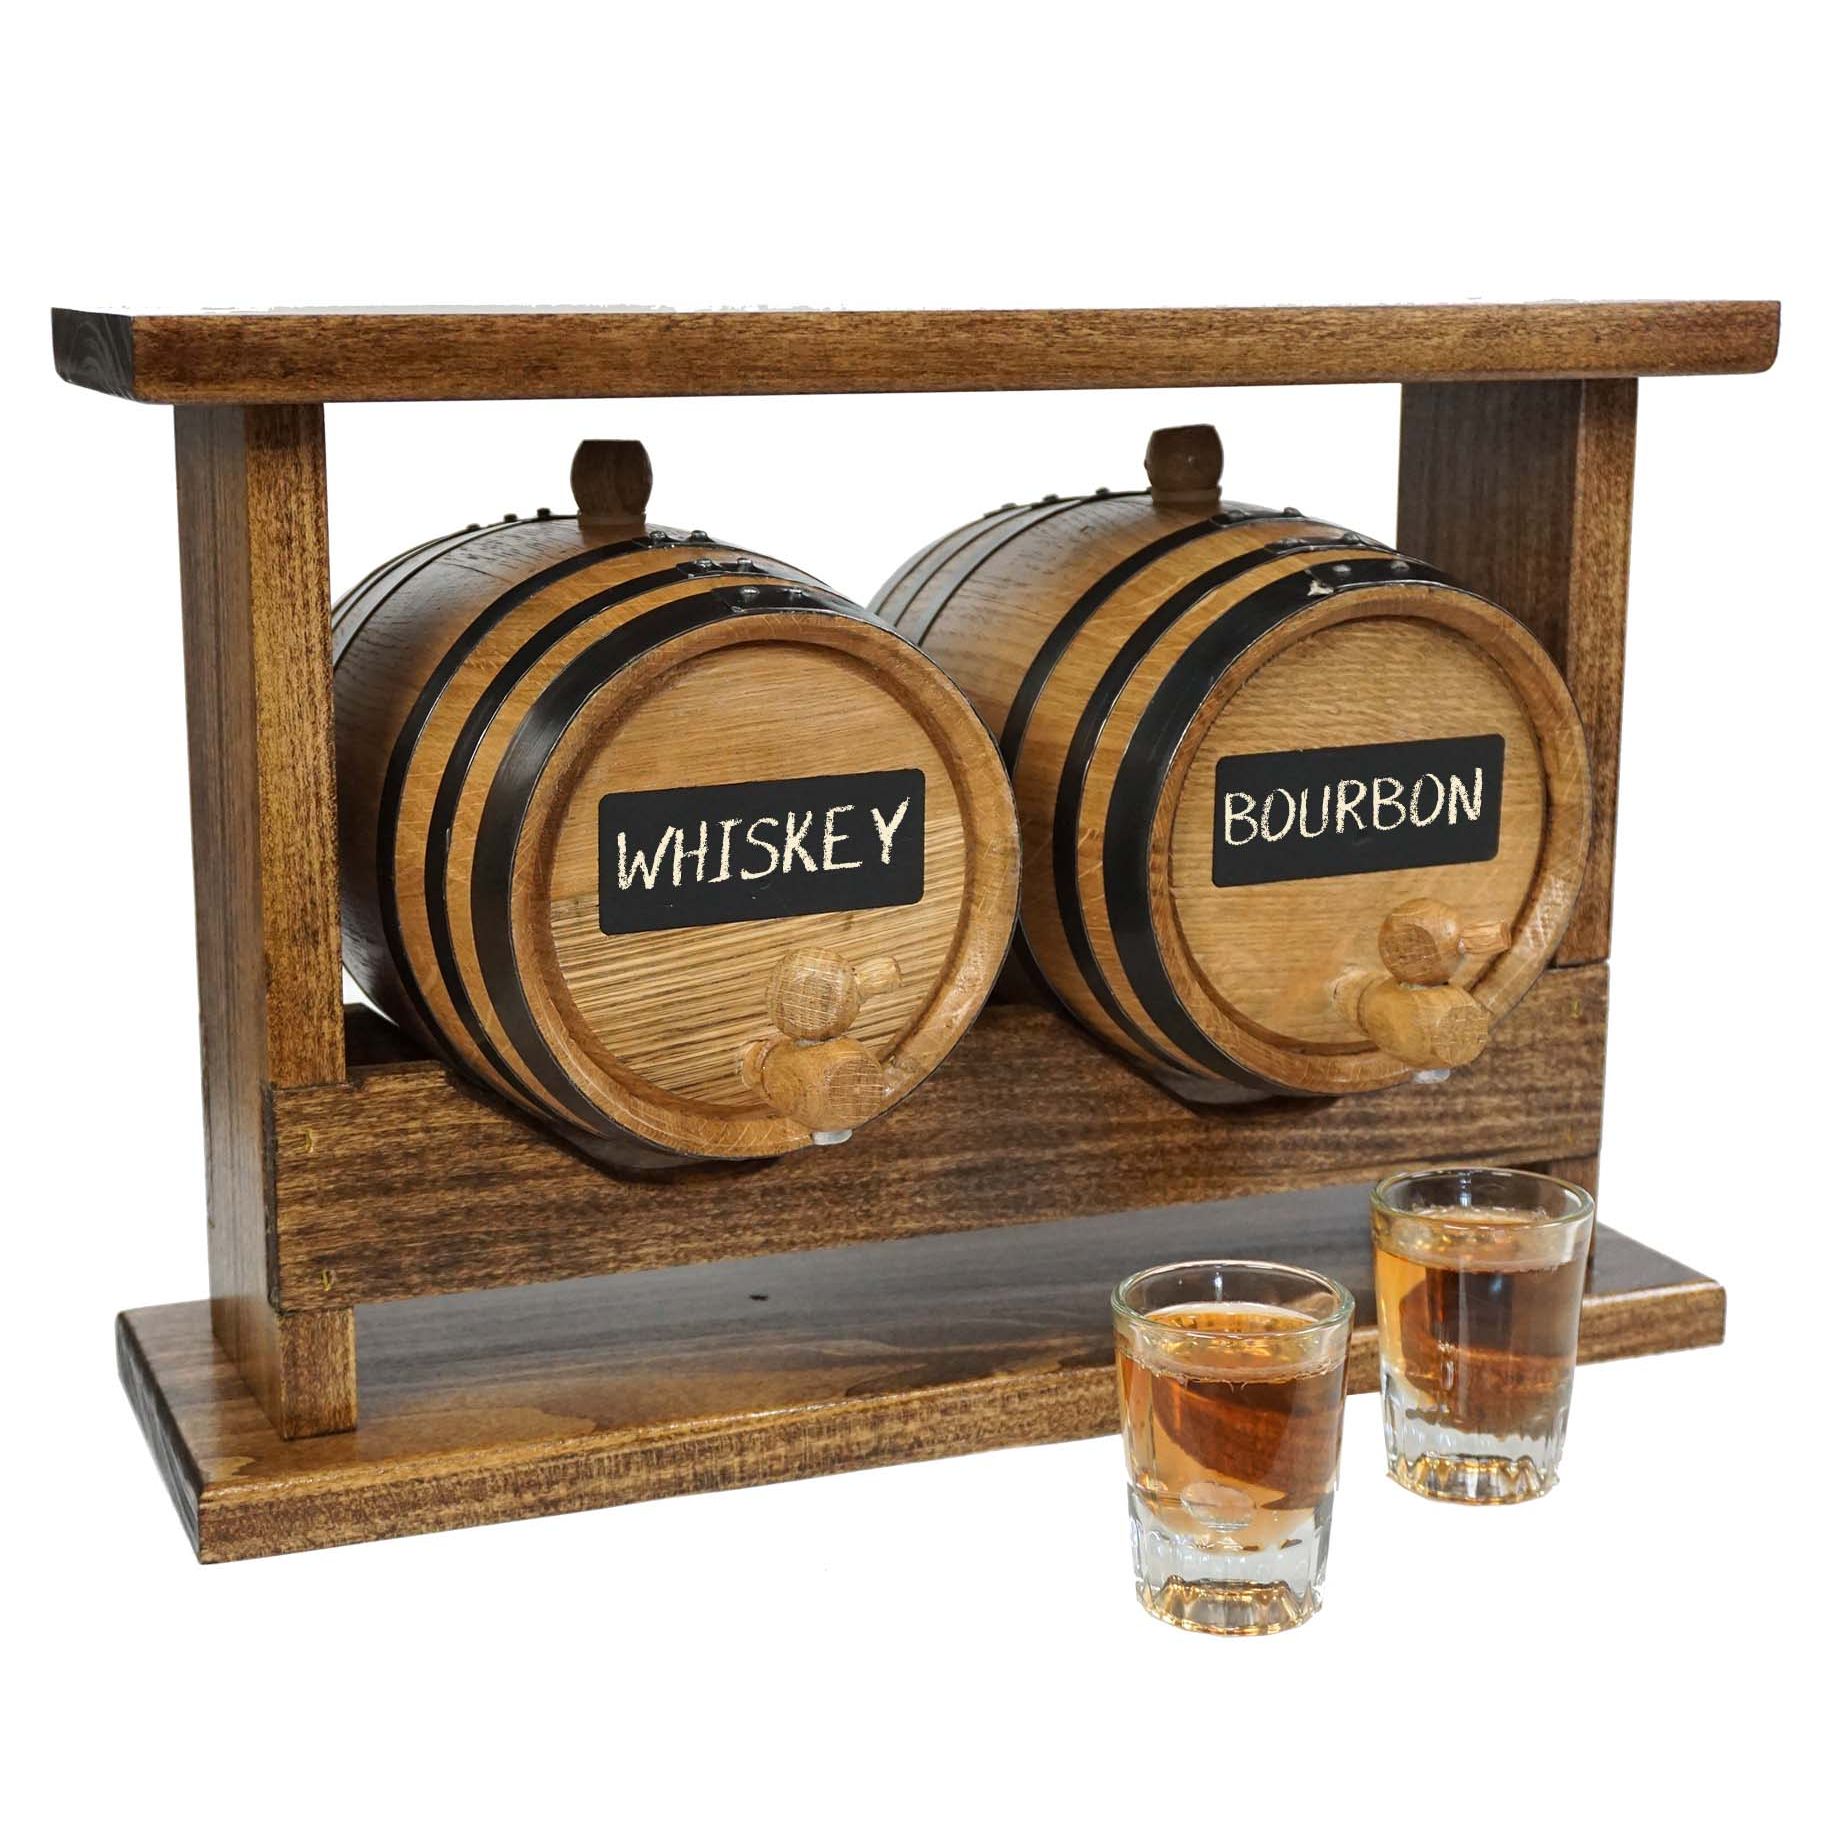 Double Smoking Tray made from Authentic Whiskey Barrel Stave, with Whiskey  Glasses and Smoking Chips